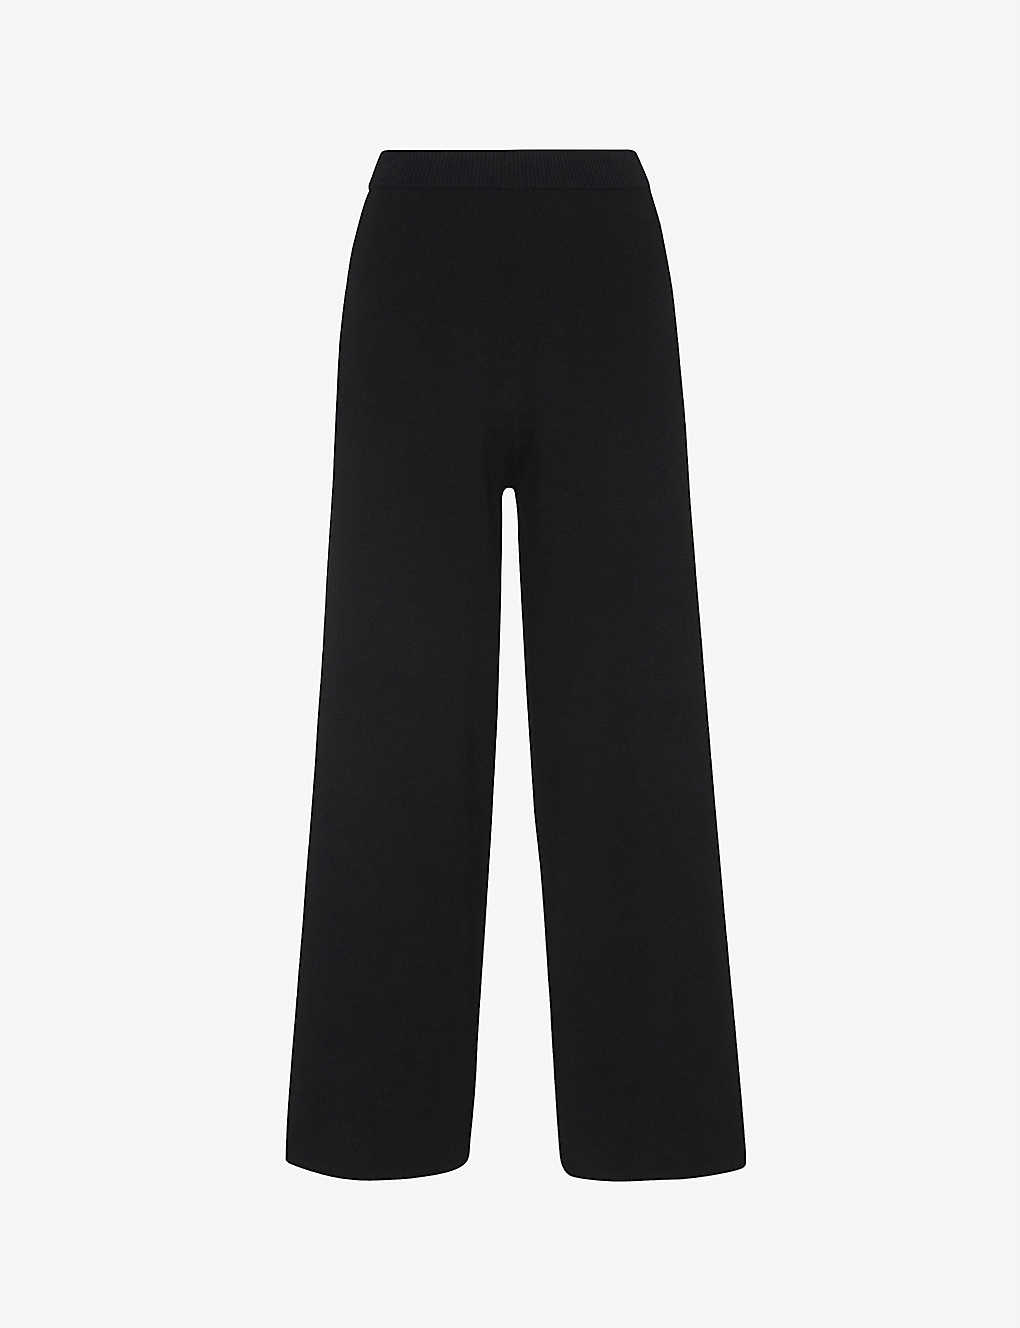 WHISTLES WHISTLES WOMEN'S BLACK KNITTED WIDE-LEG TROUSERS,42977565